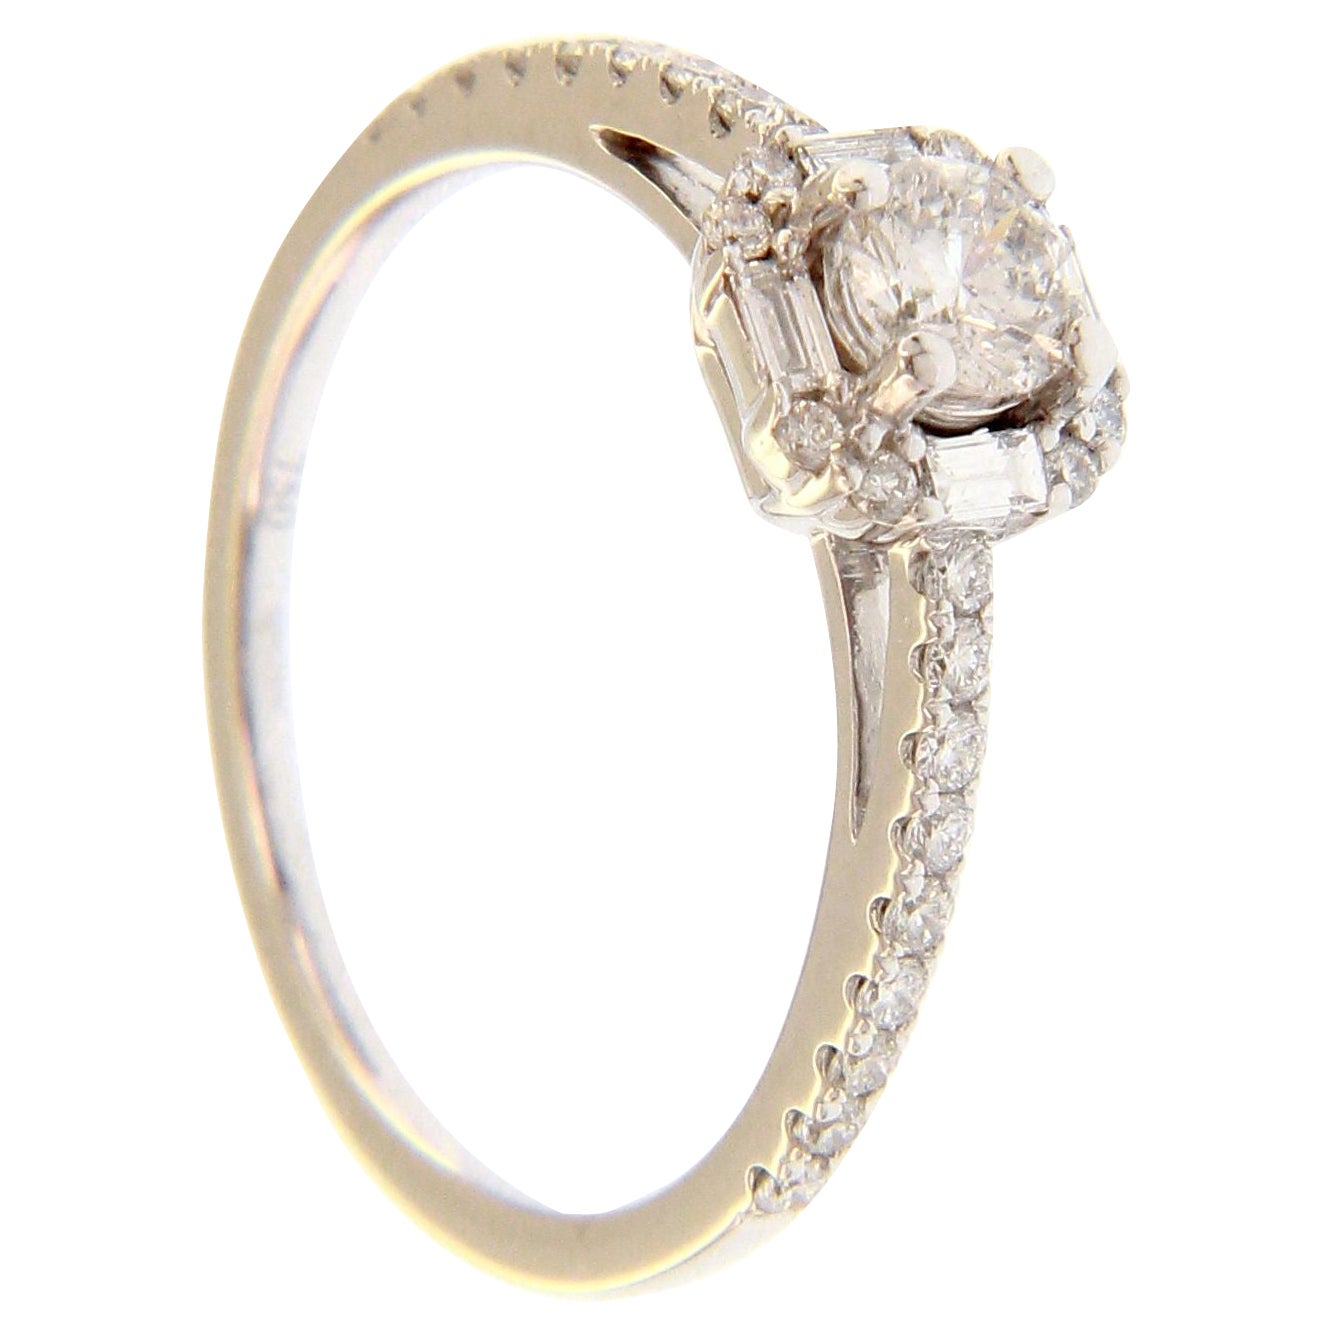 For Sale:  18K White Gold Pradera Halo Engagement Ring with Diamonds